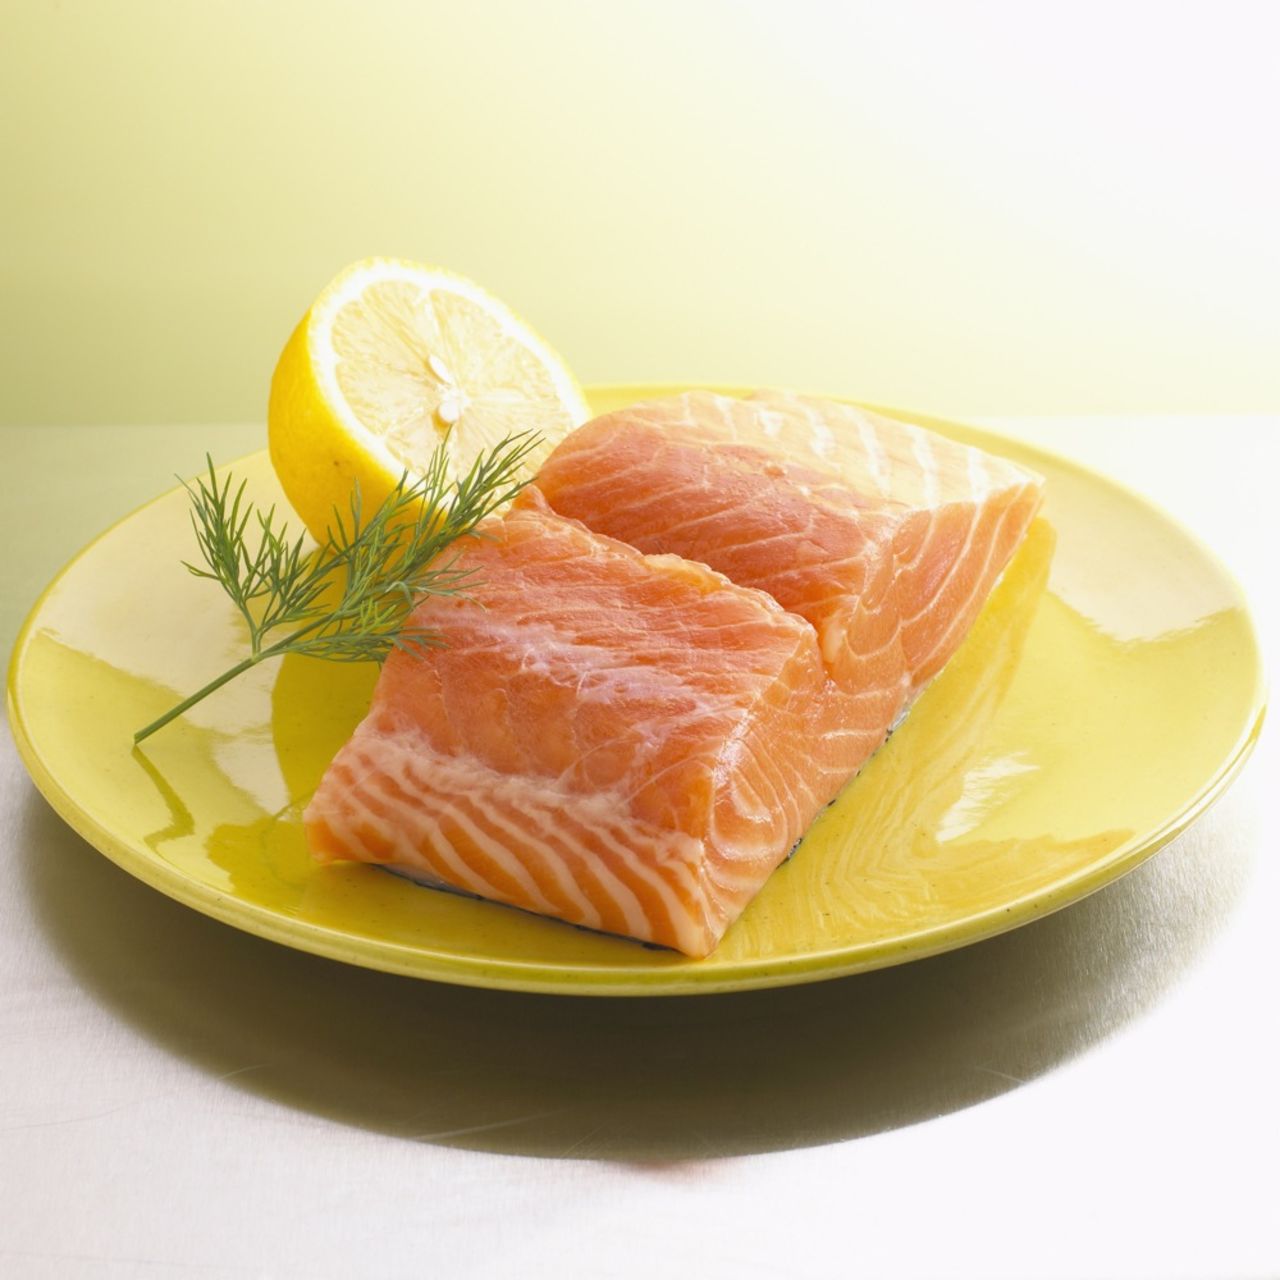 Research suggests that salmon's omega-3 fatty acids help build calorie-burning muscle.